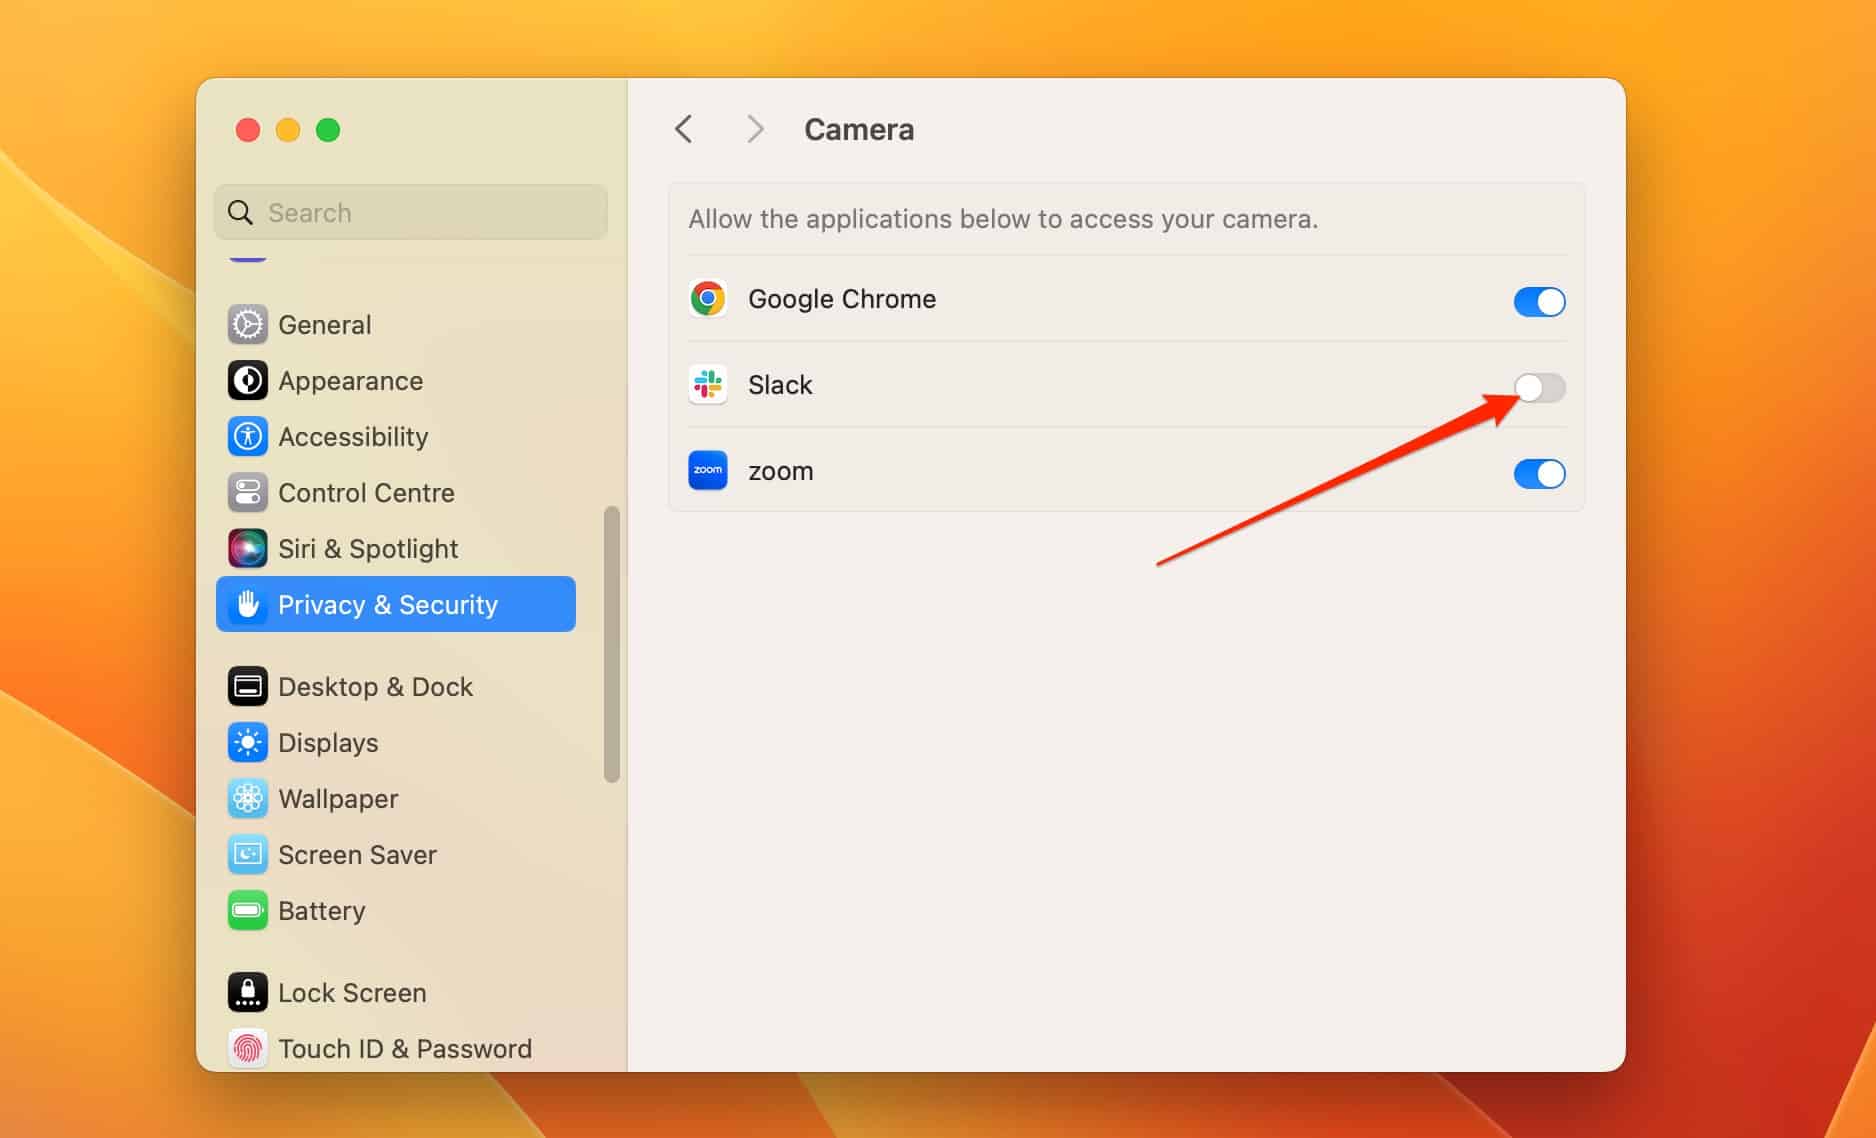 Toggle off your Mac camera settings in System Settings